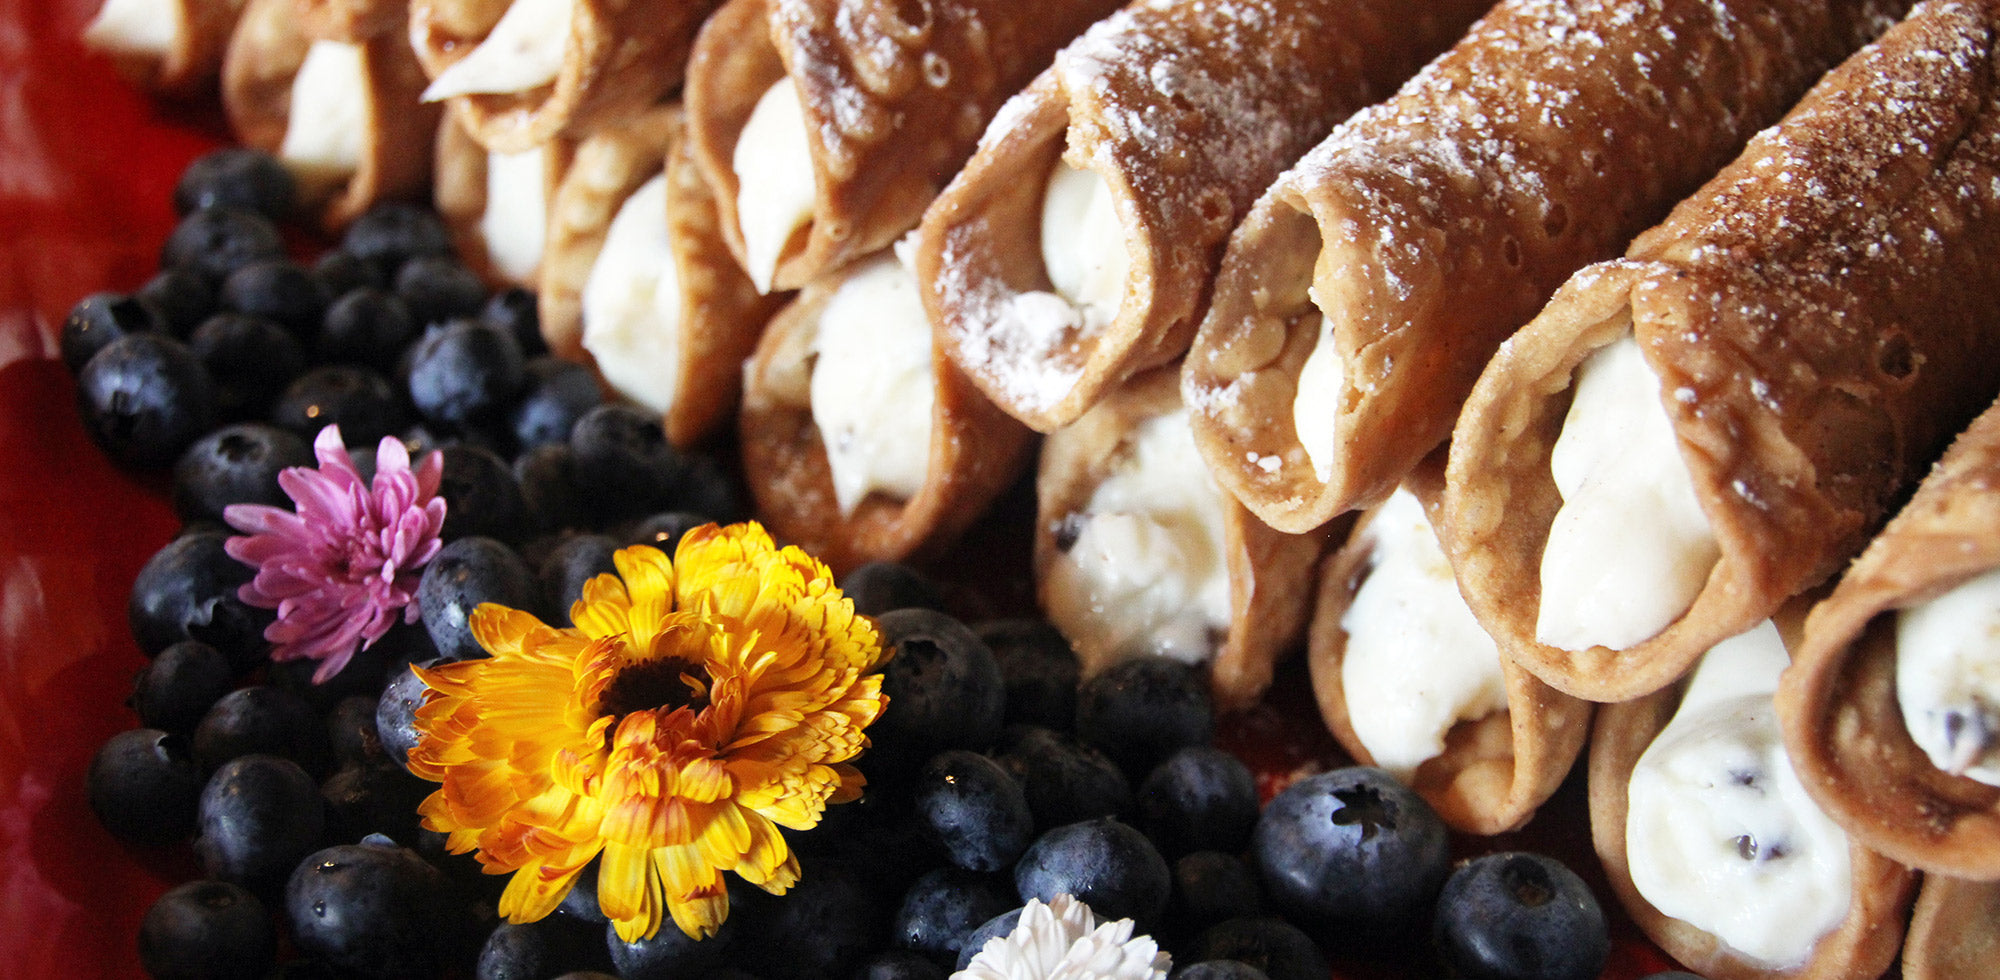 Stacked cannolis with blueberries and flower garnish